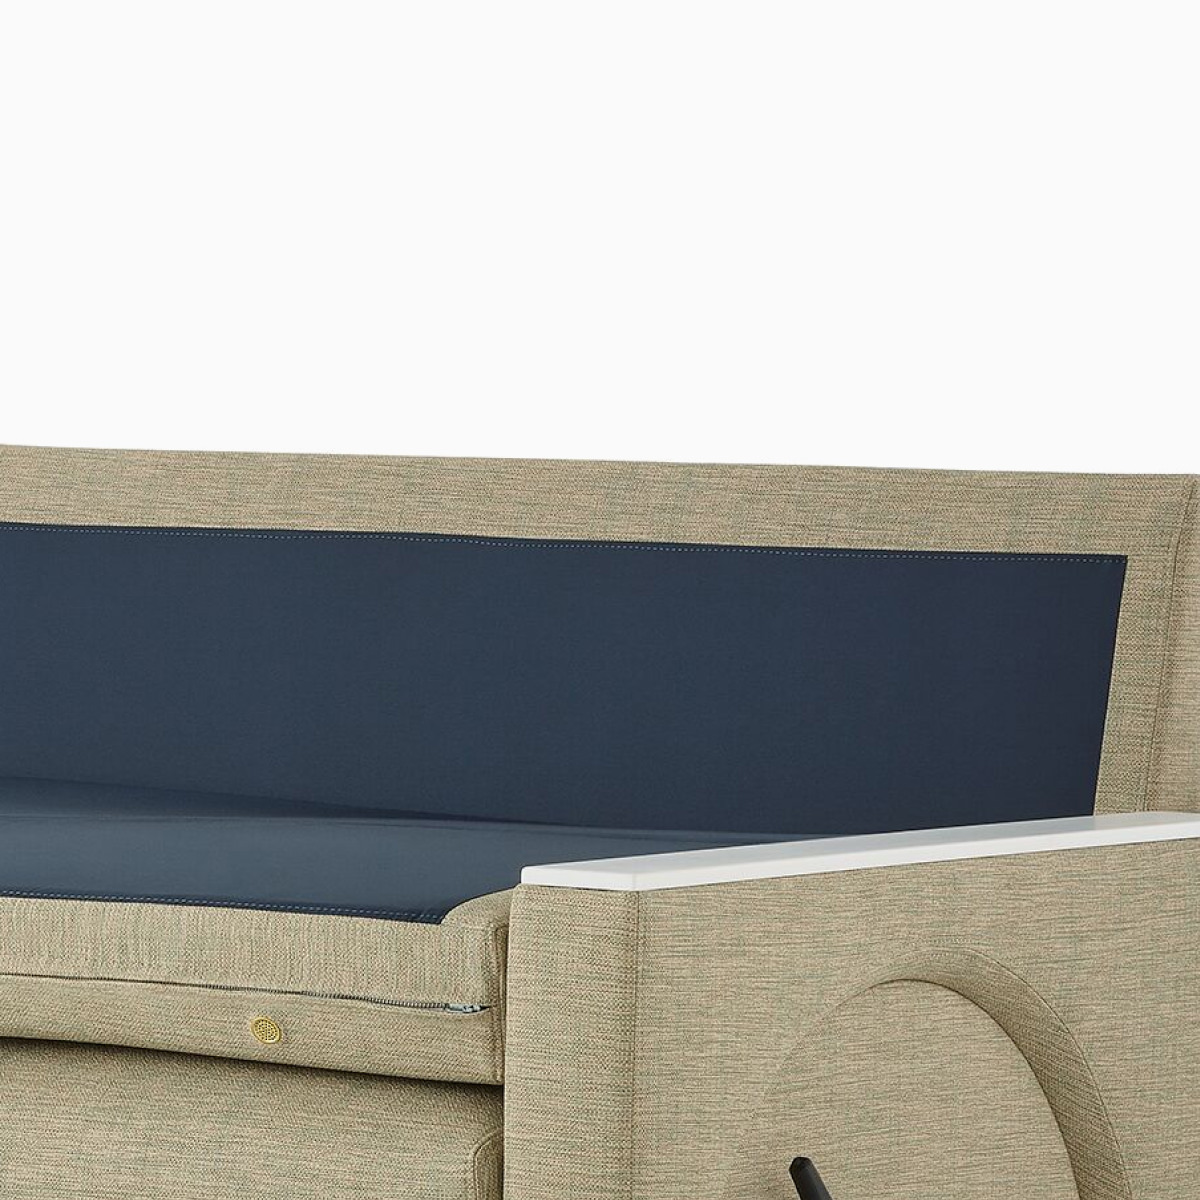 Detail of the antimicrobial, moisture proof, and cleanable sleep surface on a Nemschoff Merge 2 Flop Sofa.